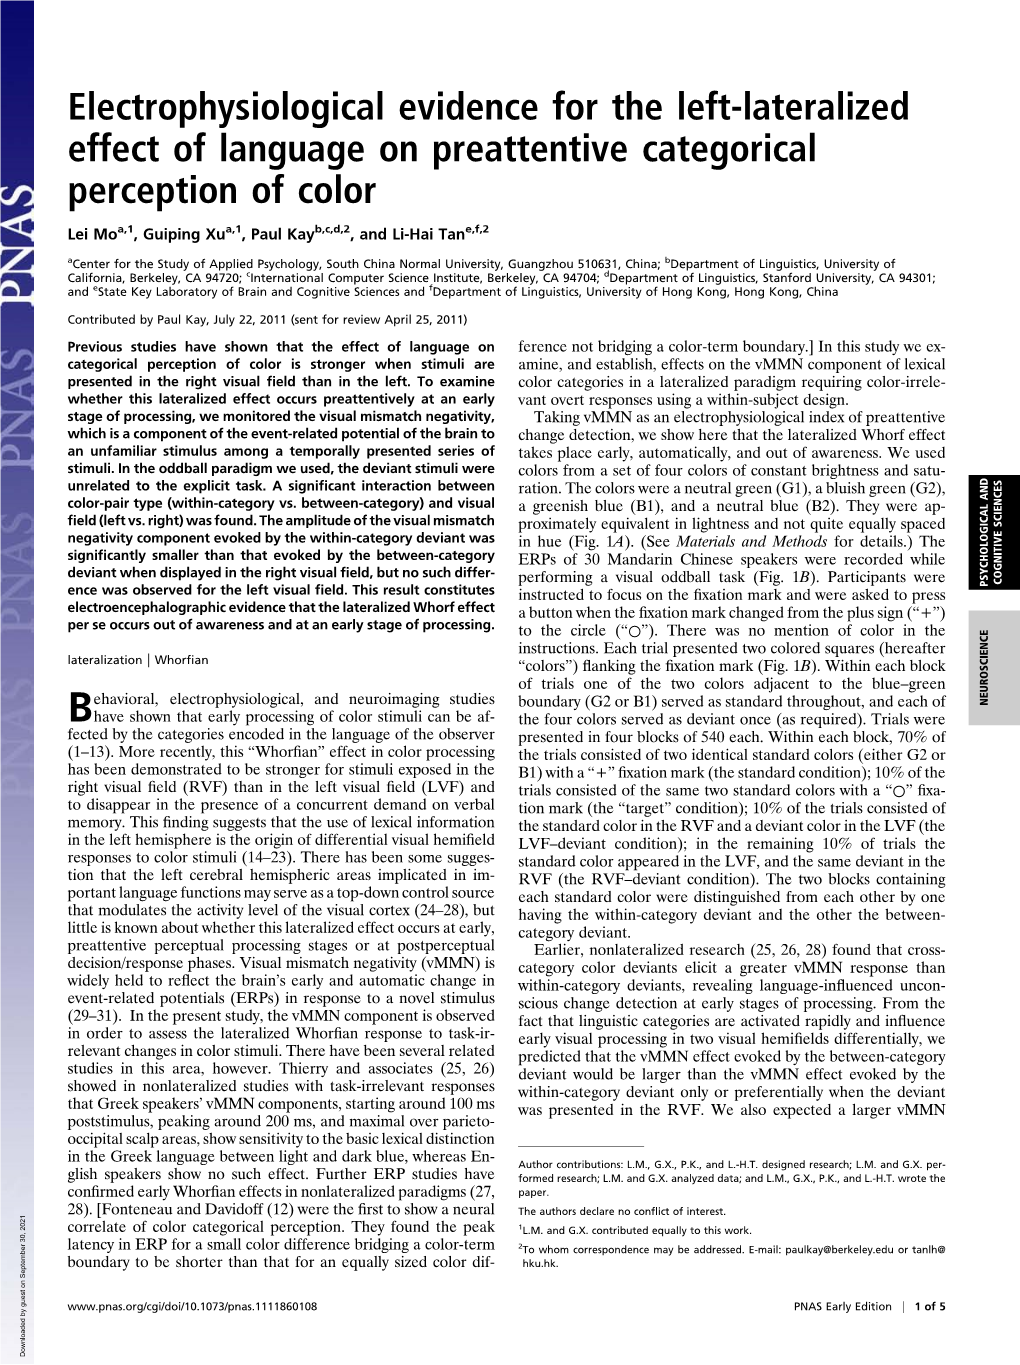 Electrophysiological Evidence for the Left-Lateralized Effect of Language on Preattentive Categorical Perception of Color